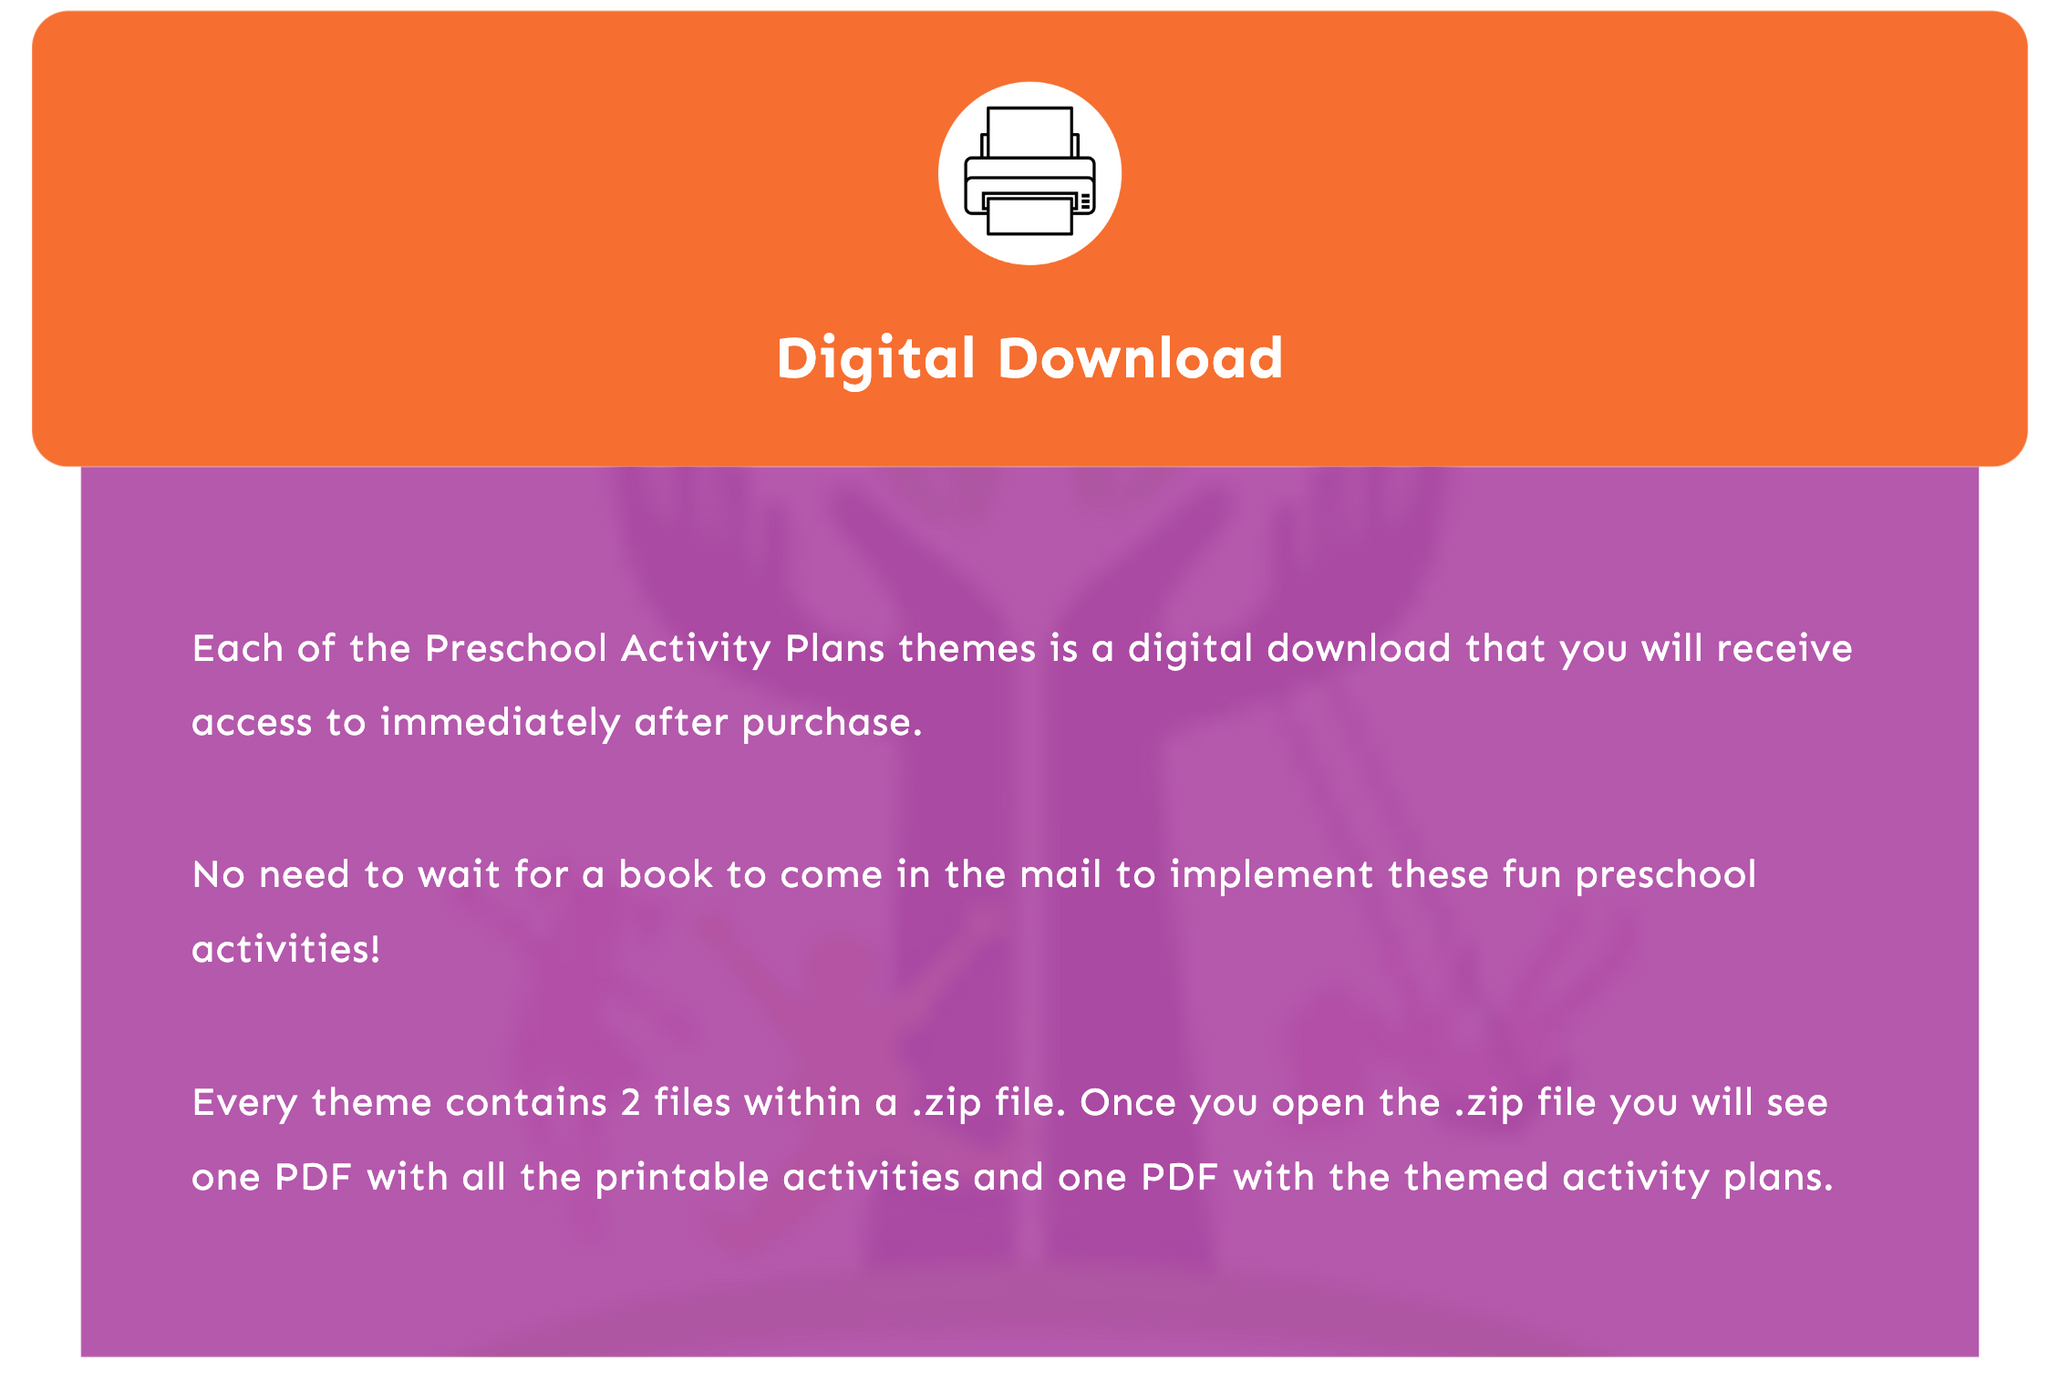 this is a digital download product. You will receive a zip file and will need to open the zip file before accessing the activity plans with a PDF reader